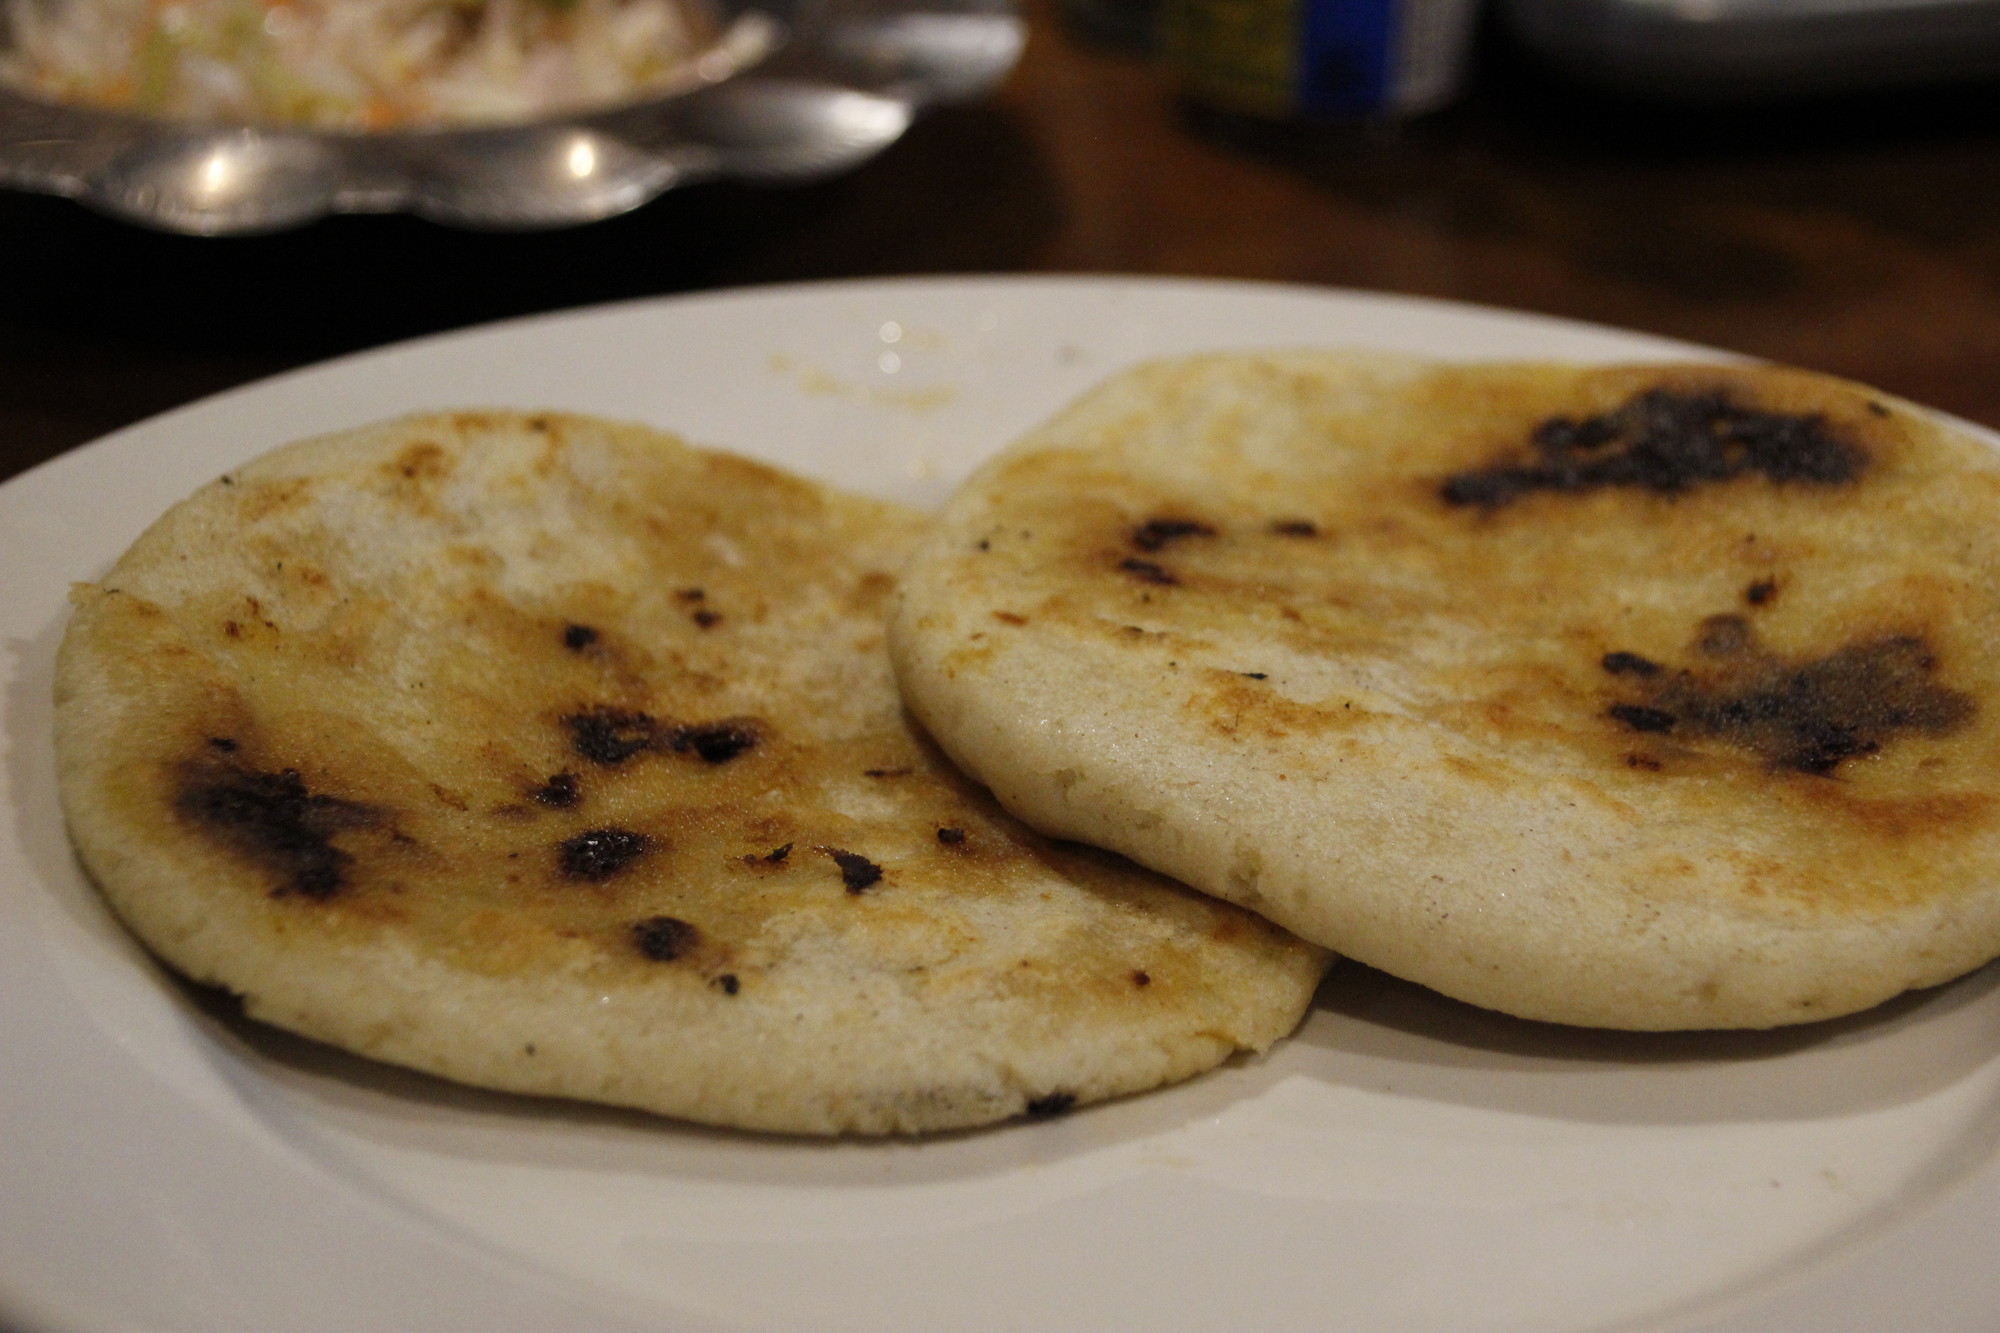 Pupusas, popular at La Perla, are thin handmade tortillas filled with combinations of pork, cheese, rice or beans.